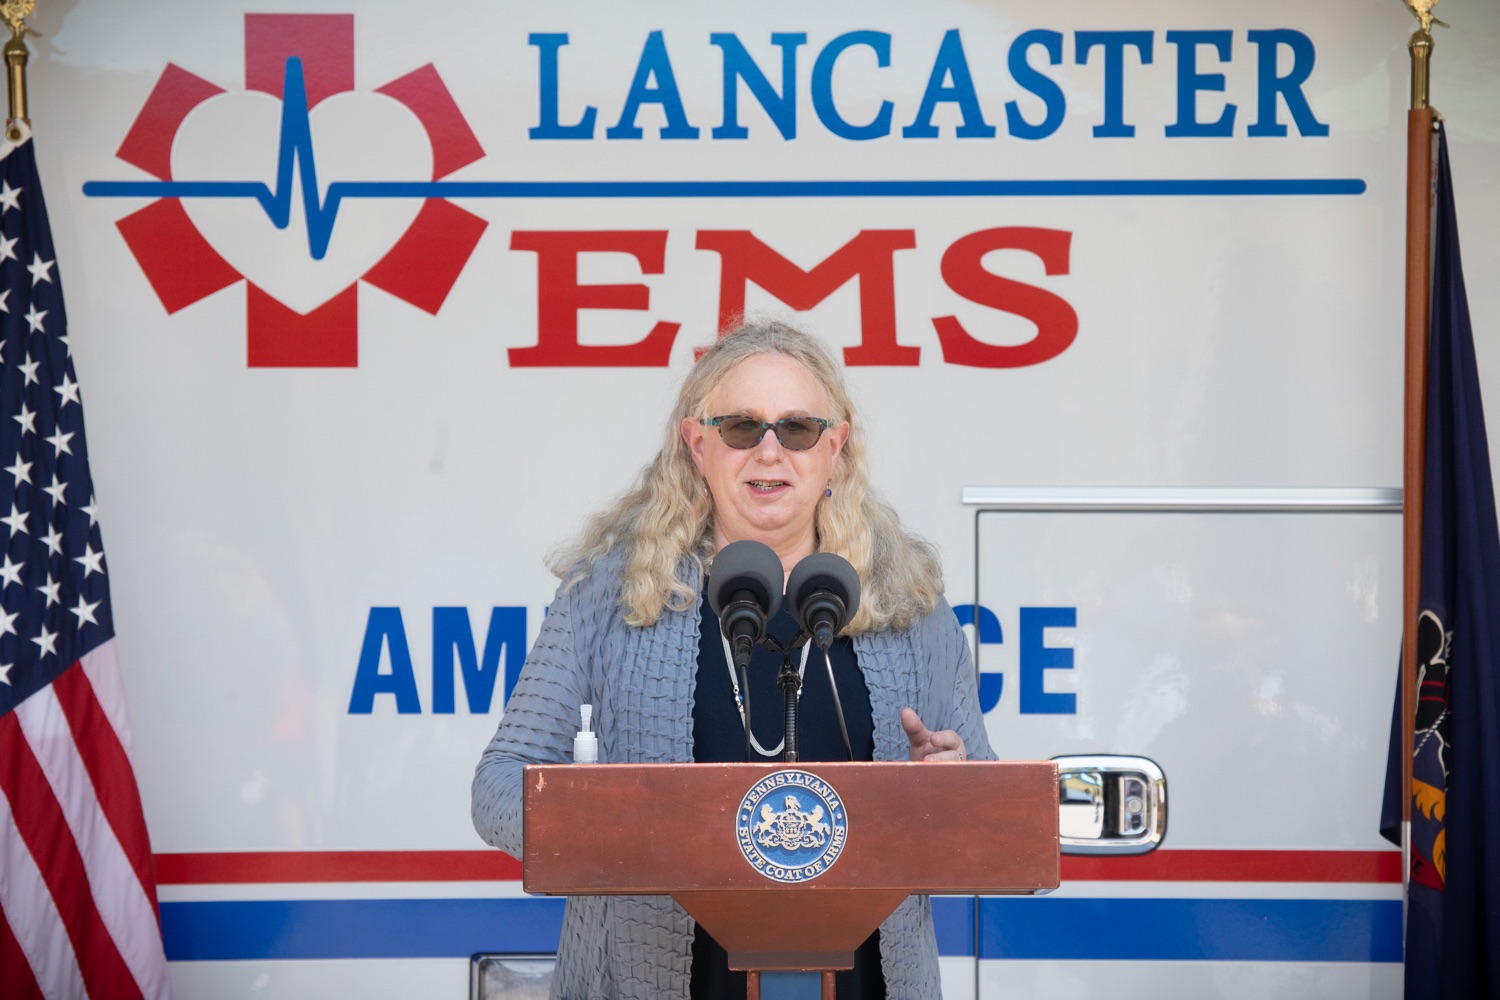 Secretary of Health for the Commonwealth of Pennsylvania, Dr. Rachel Levine, speaking to the press. Governor Tom Wolf visited the Millersville location of Lancaster EMS today to thank first responders and learn about how they are adapting their critical work during the states response to the COVID-19 pandemic.  Millersville, PA  July 30, 2020<br><a href="https://filesource.amperwave.net/commonwealthofpa/photo/18180_gov_first_responders_dz_010.jpg" target="_blank">⇣ Download Photo</a>